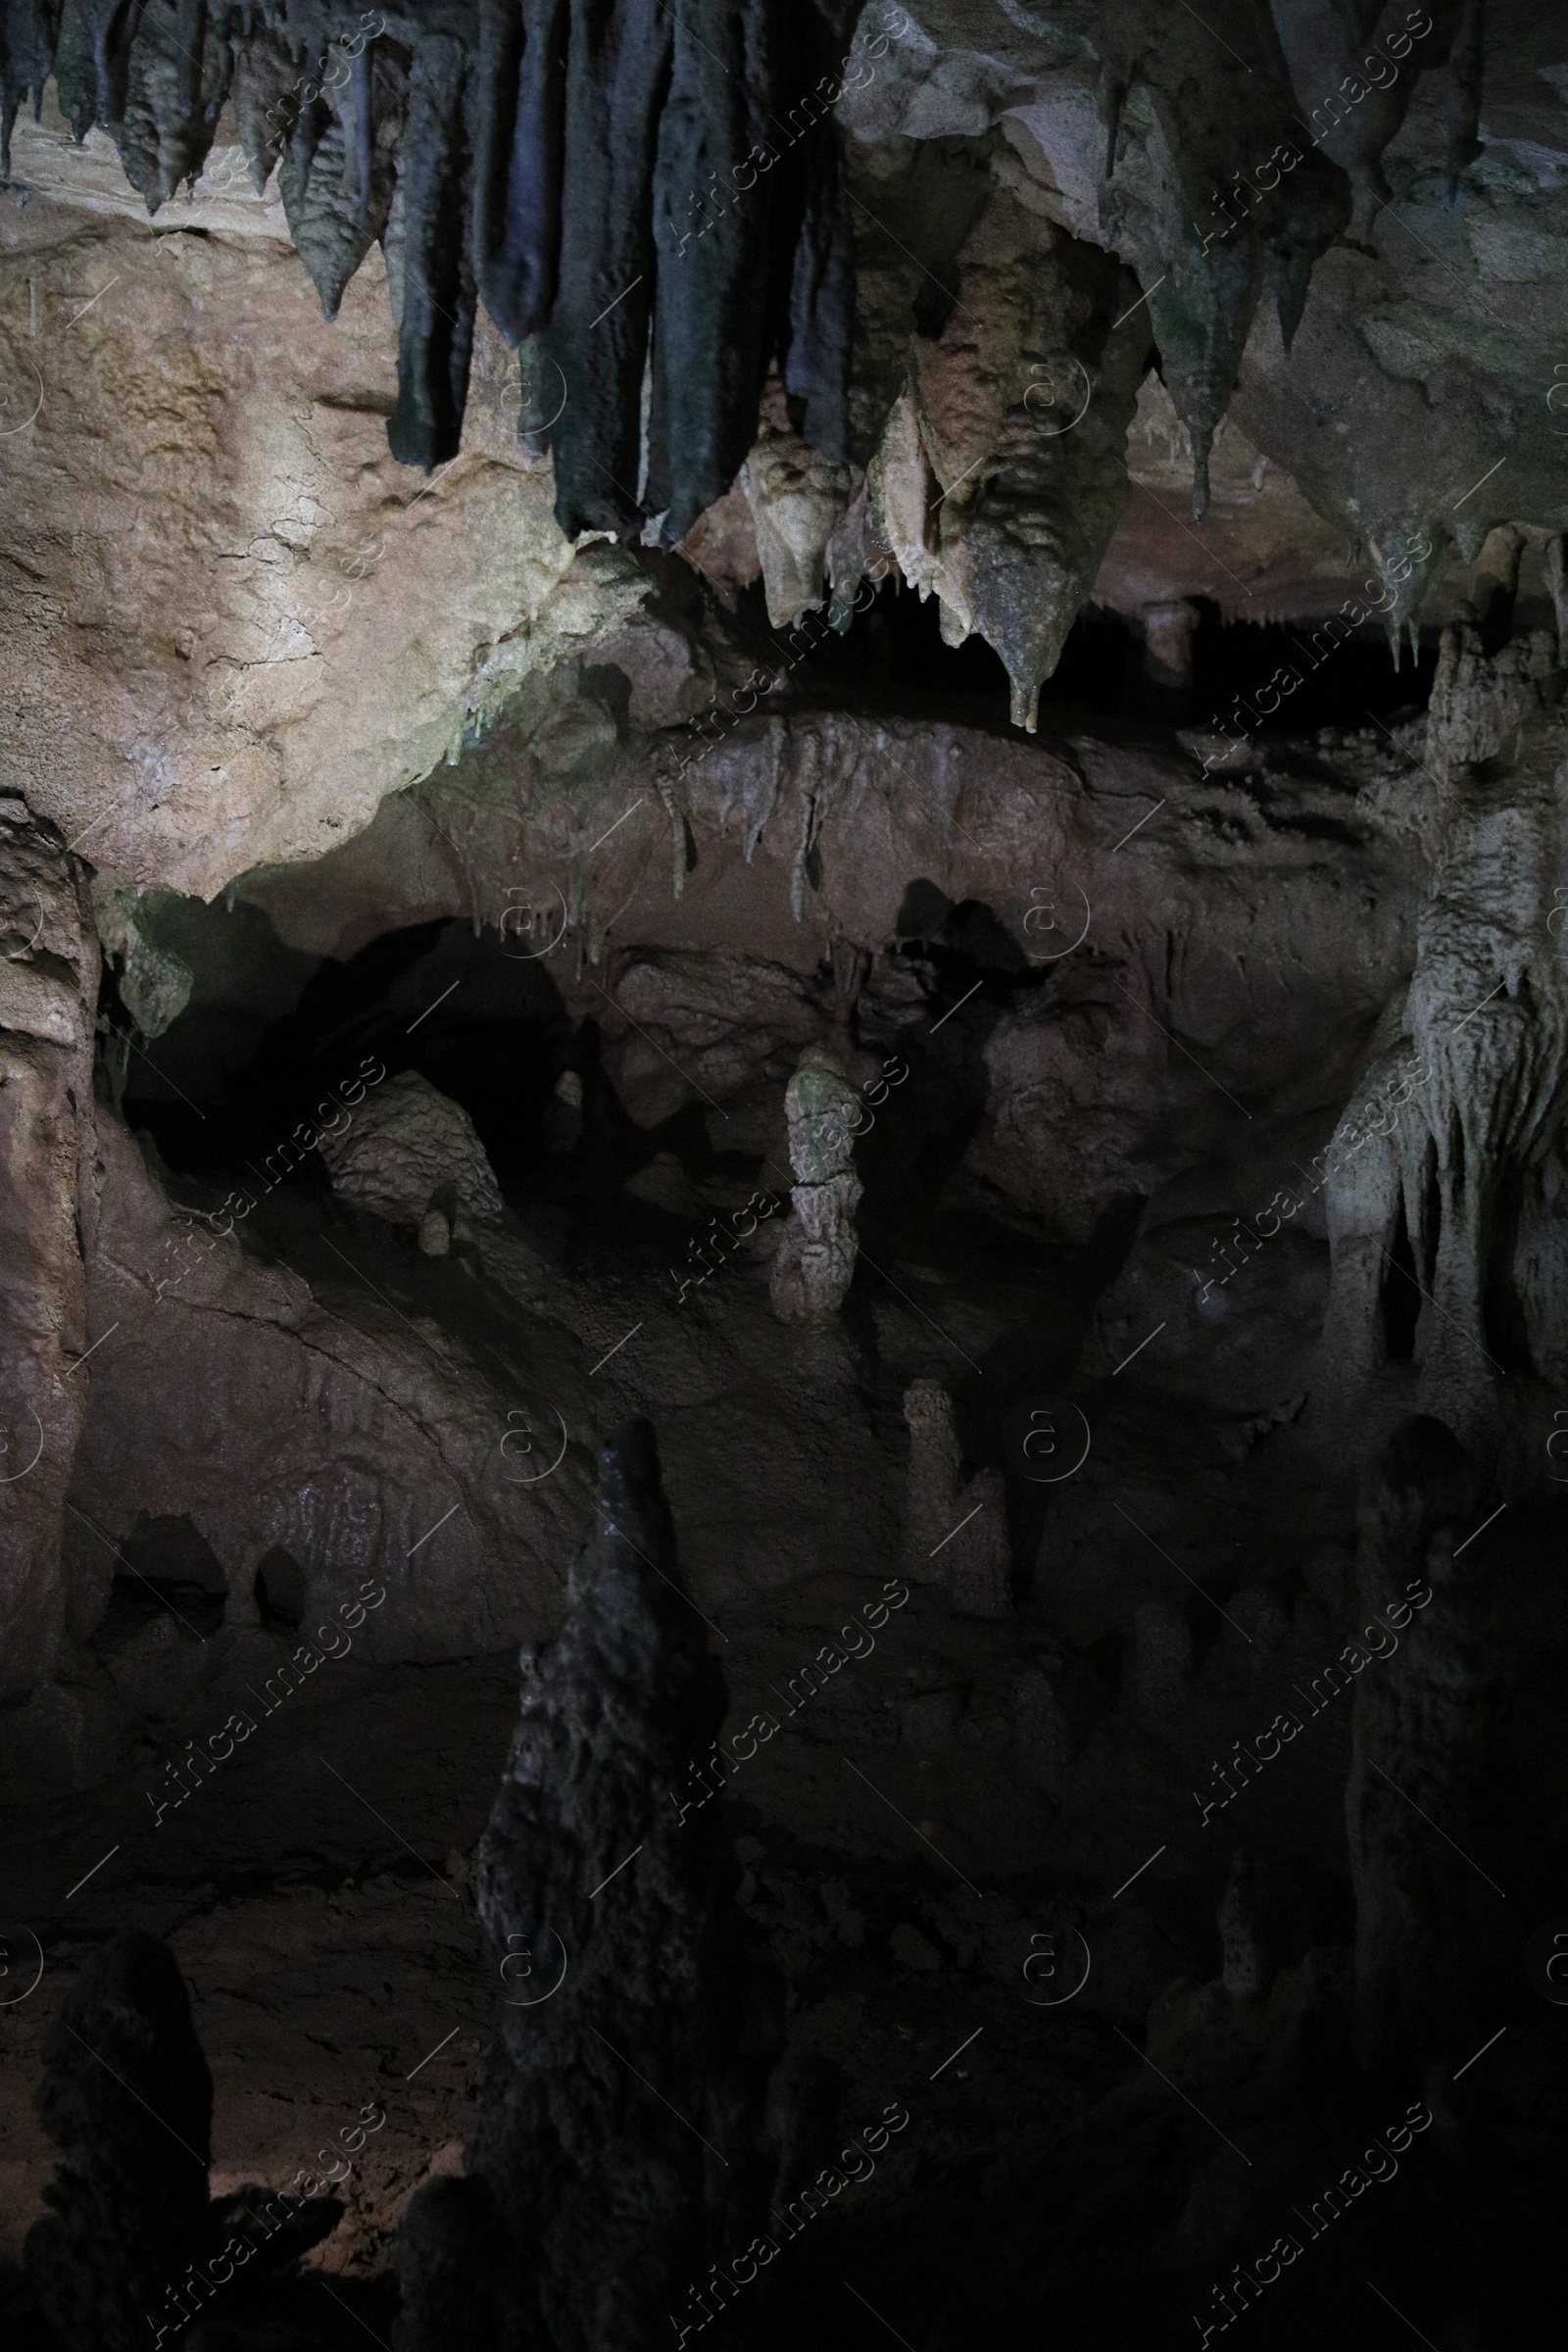 Photo of Picturesque view of many stalactite and stalagmite formations in dark cave